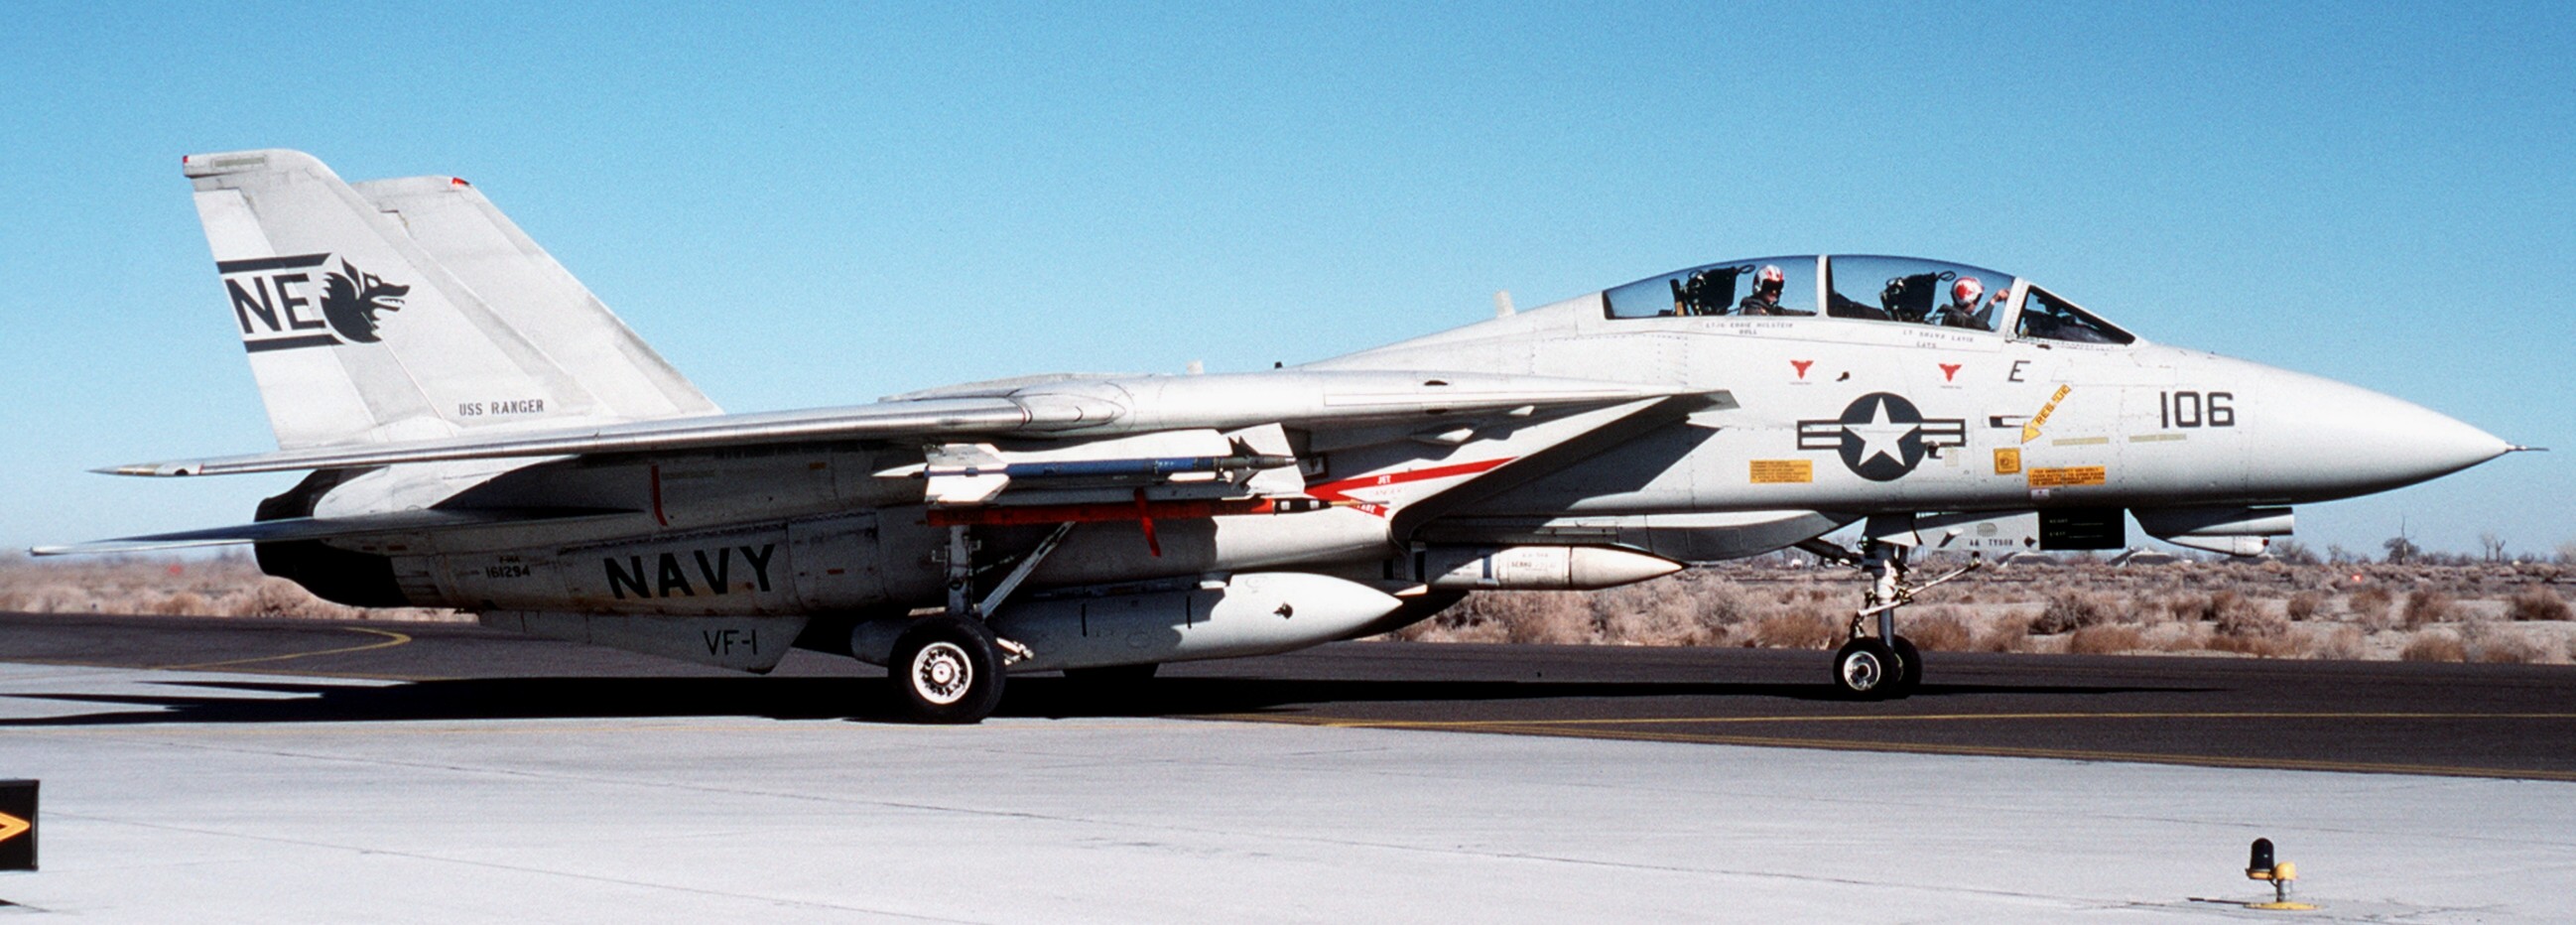 vf-1 wolfpack fighter squadron f-14a tomcat carrier air wing cvw-2 nas fallon nevada 20